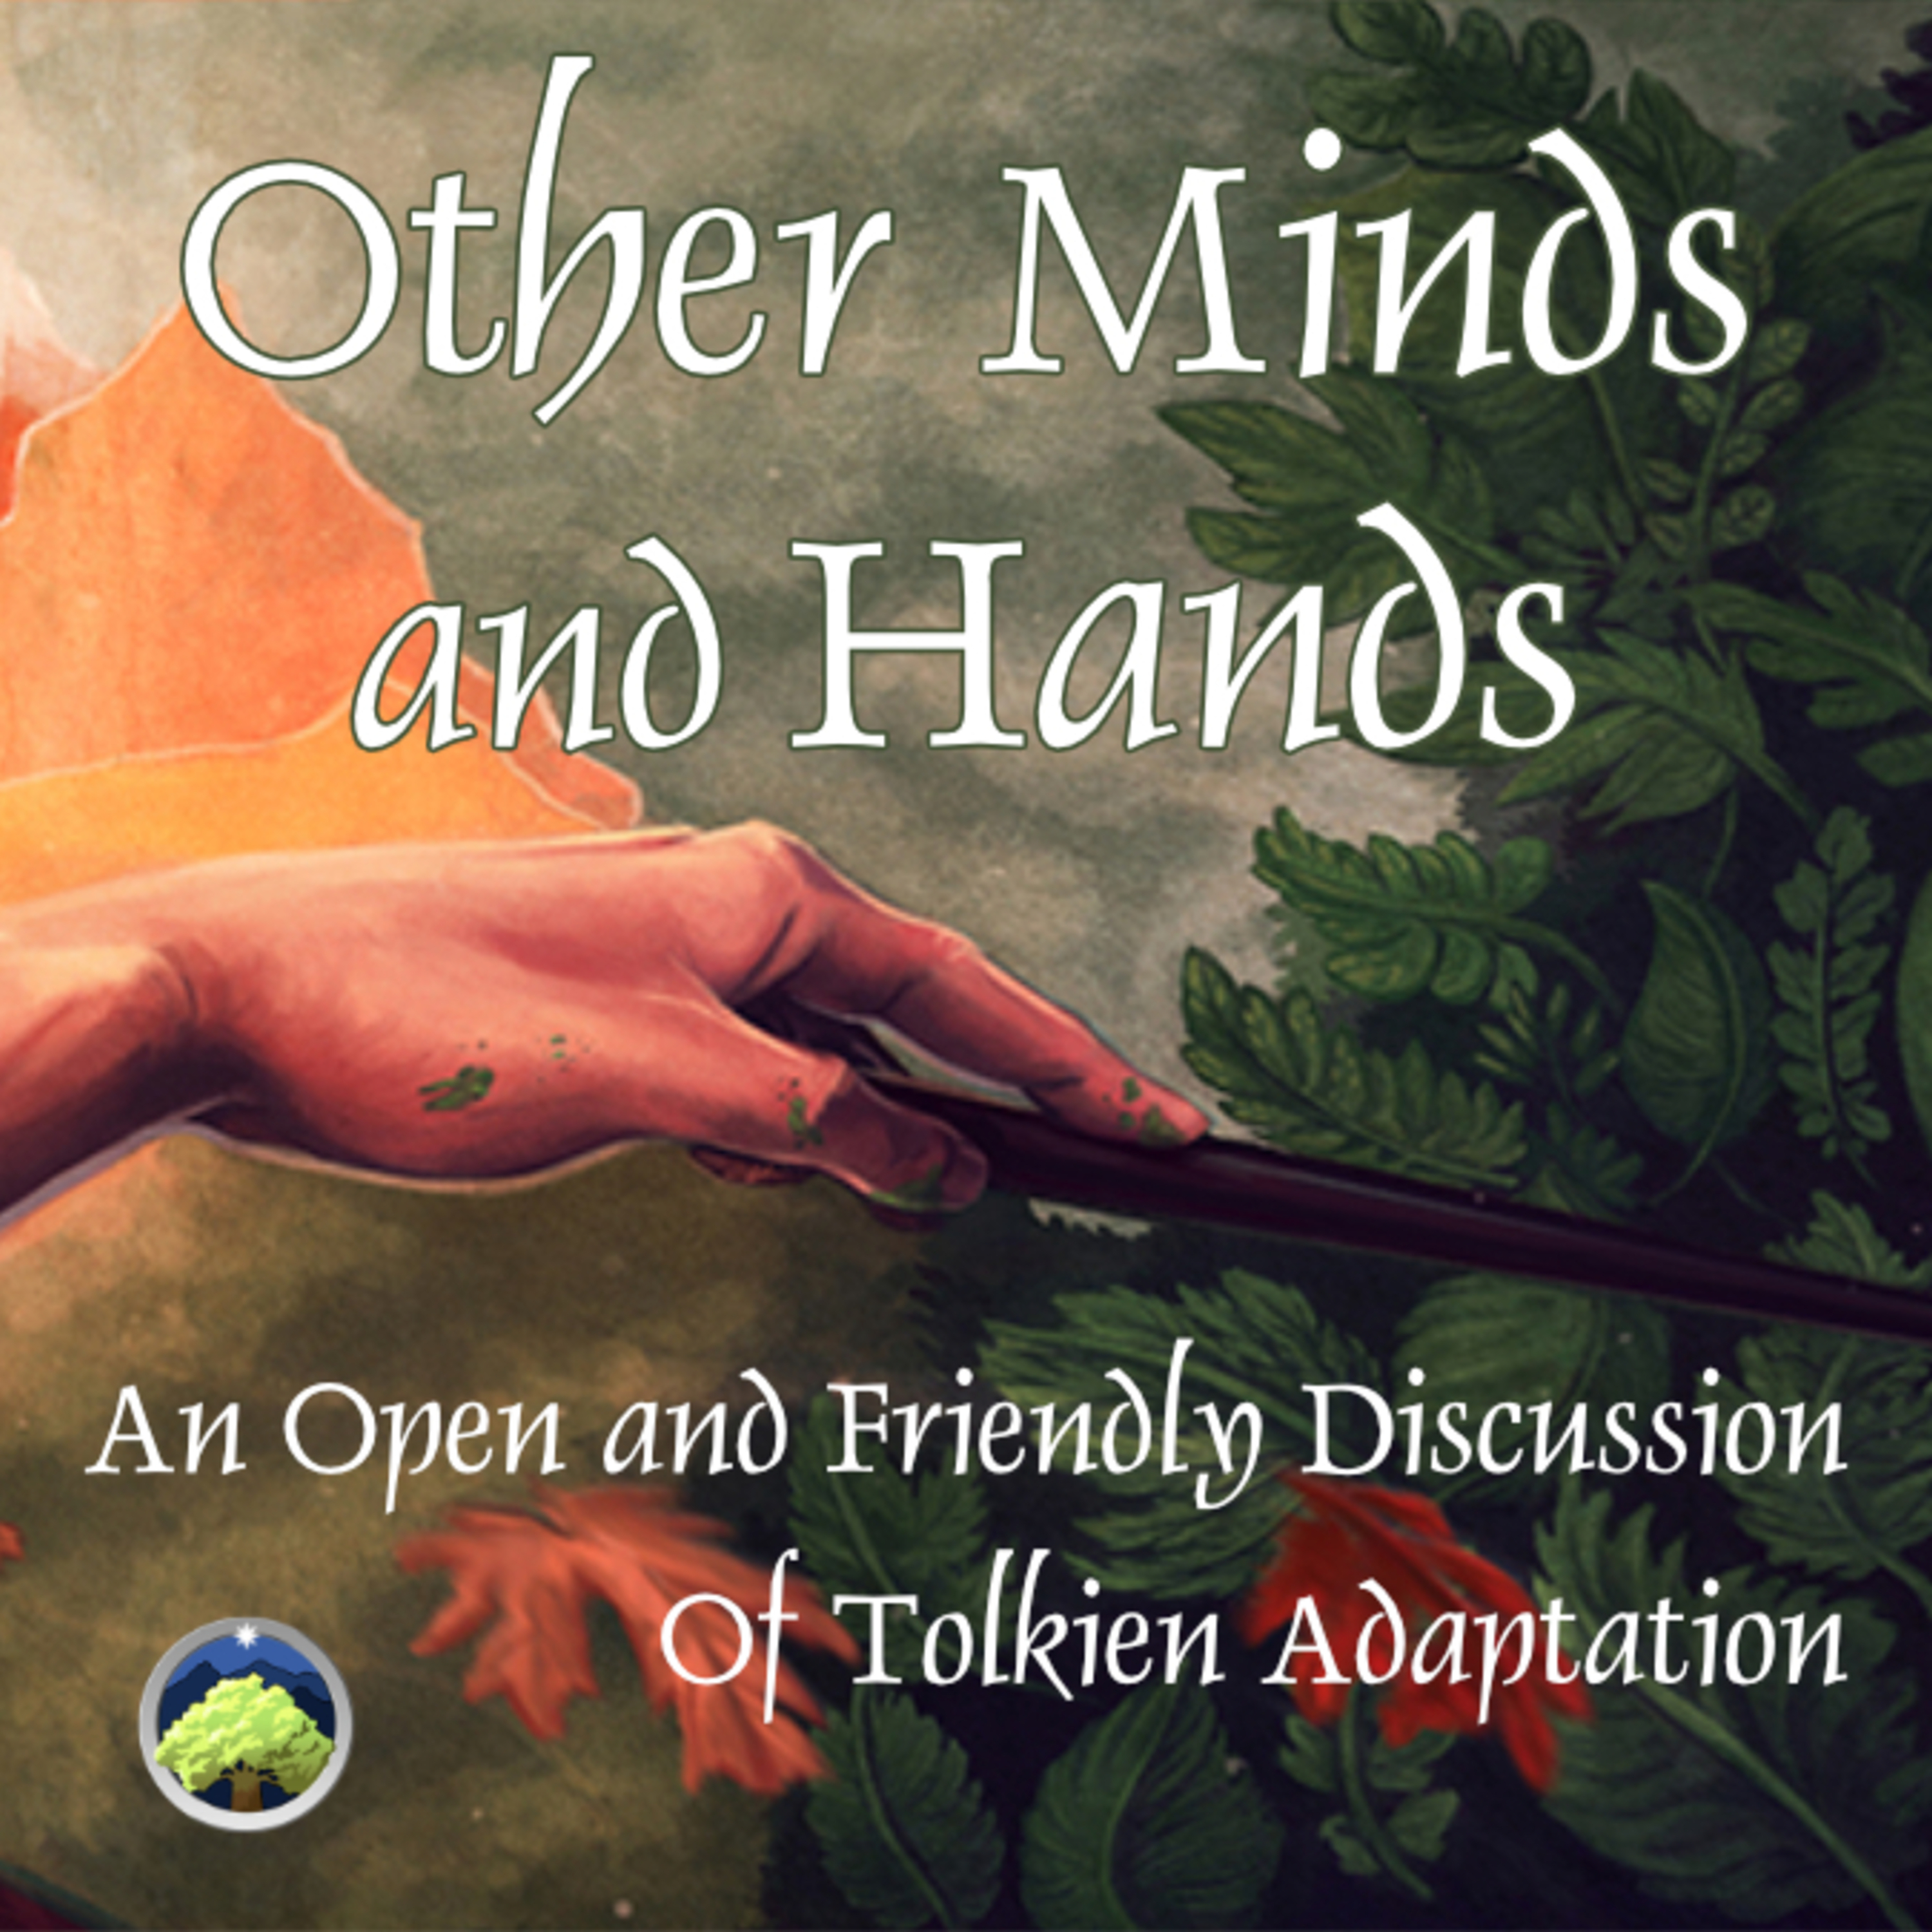 559: Other Minds and Hands, Episode 63